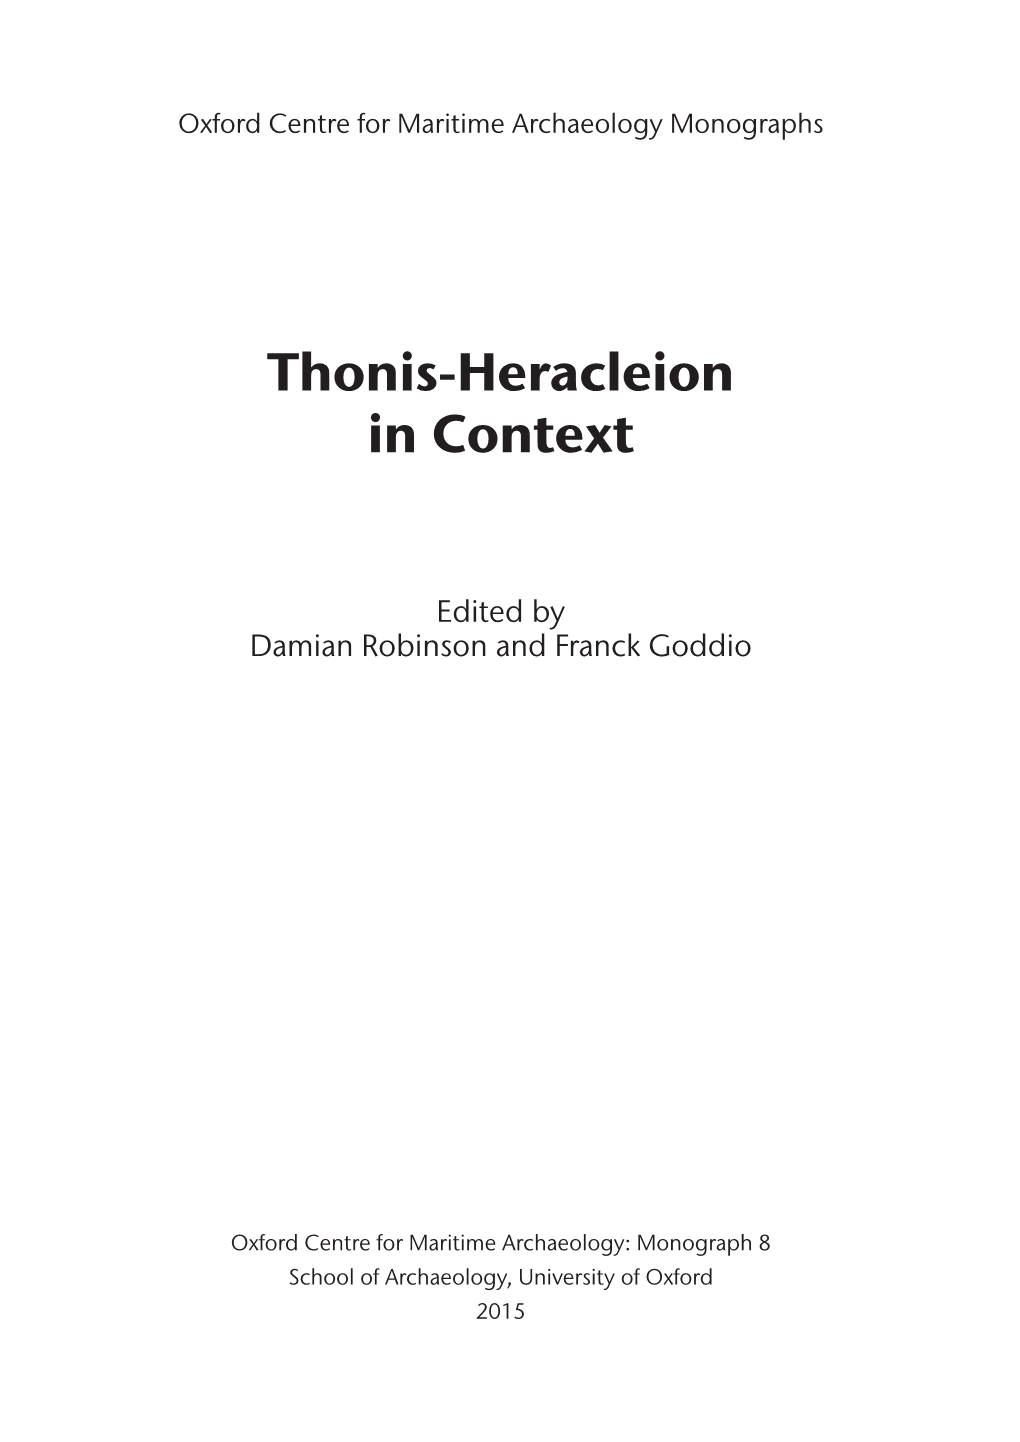 Thonis-Heracleion in Context